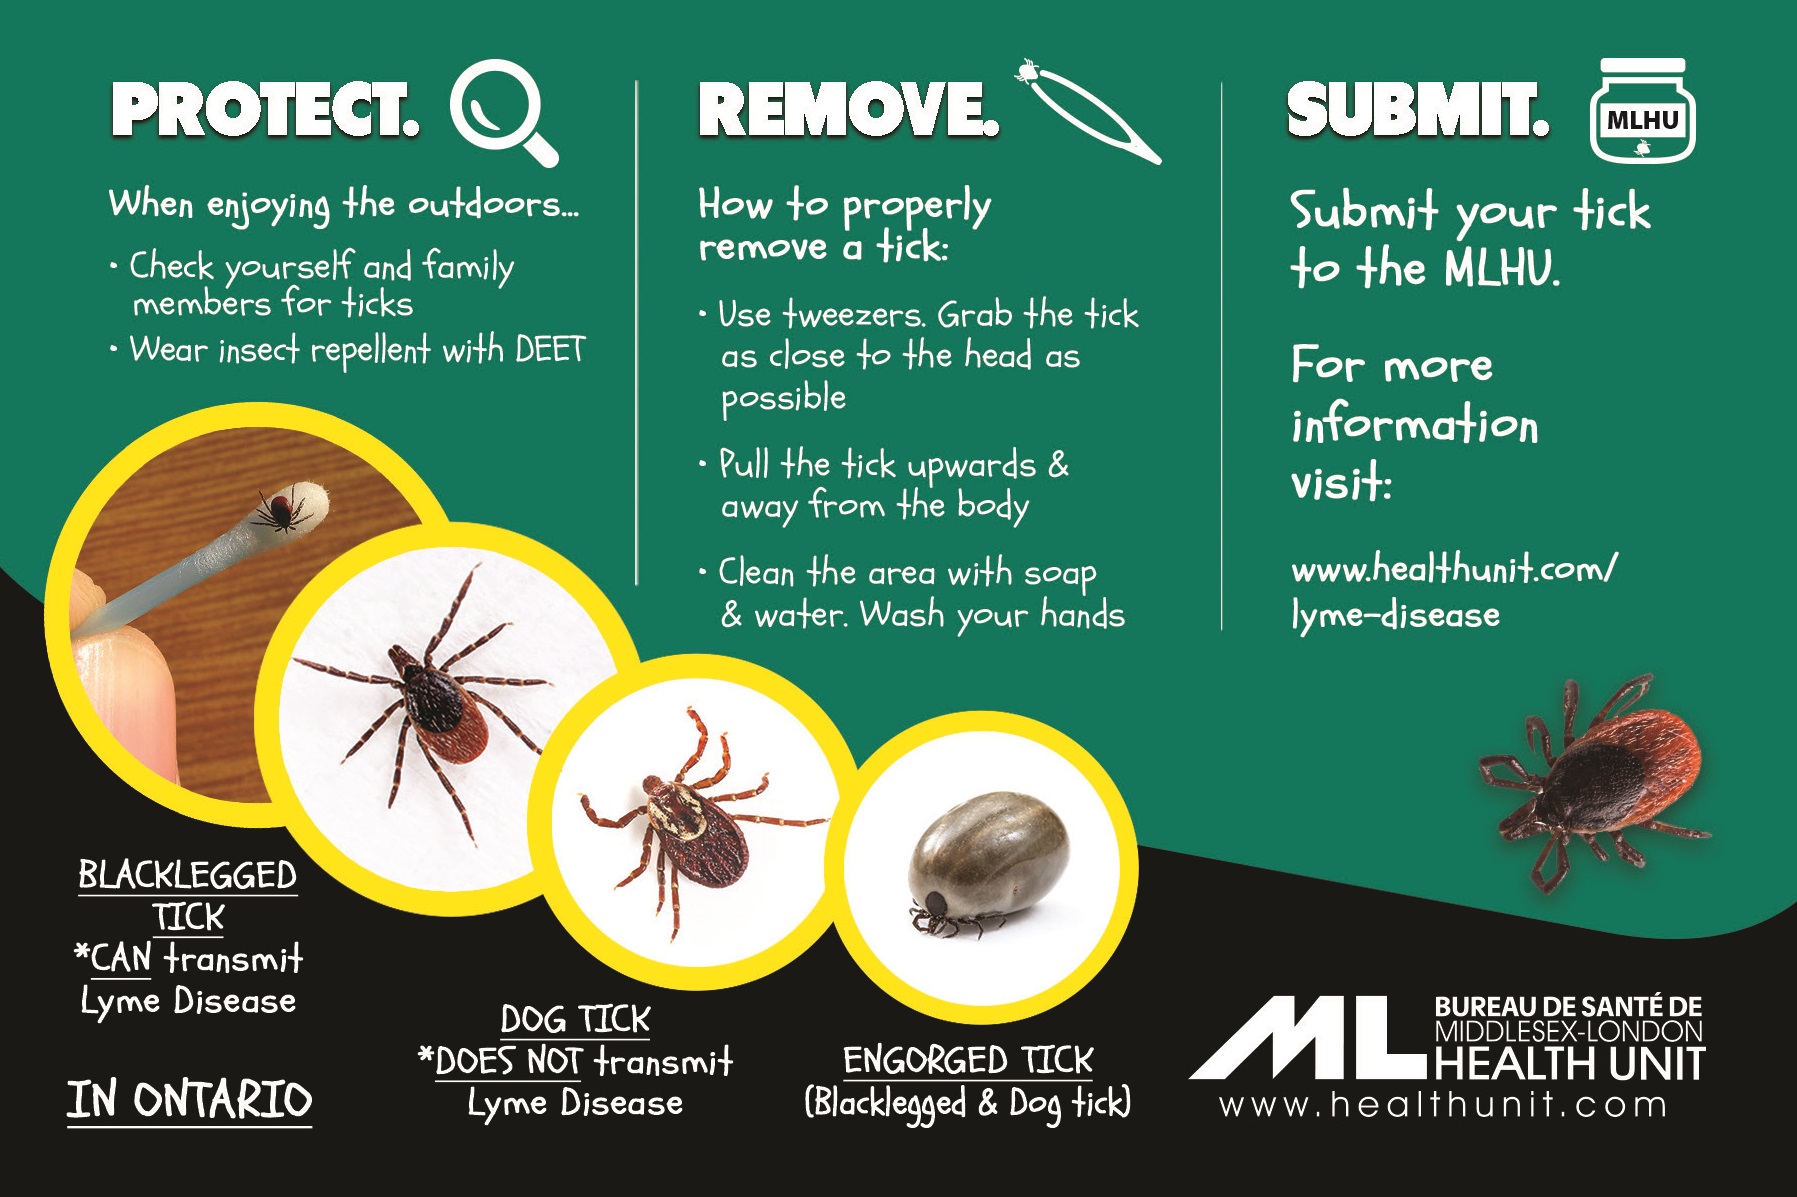 Ticks - Protect, Remove, Submit